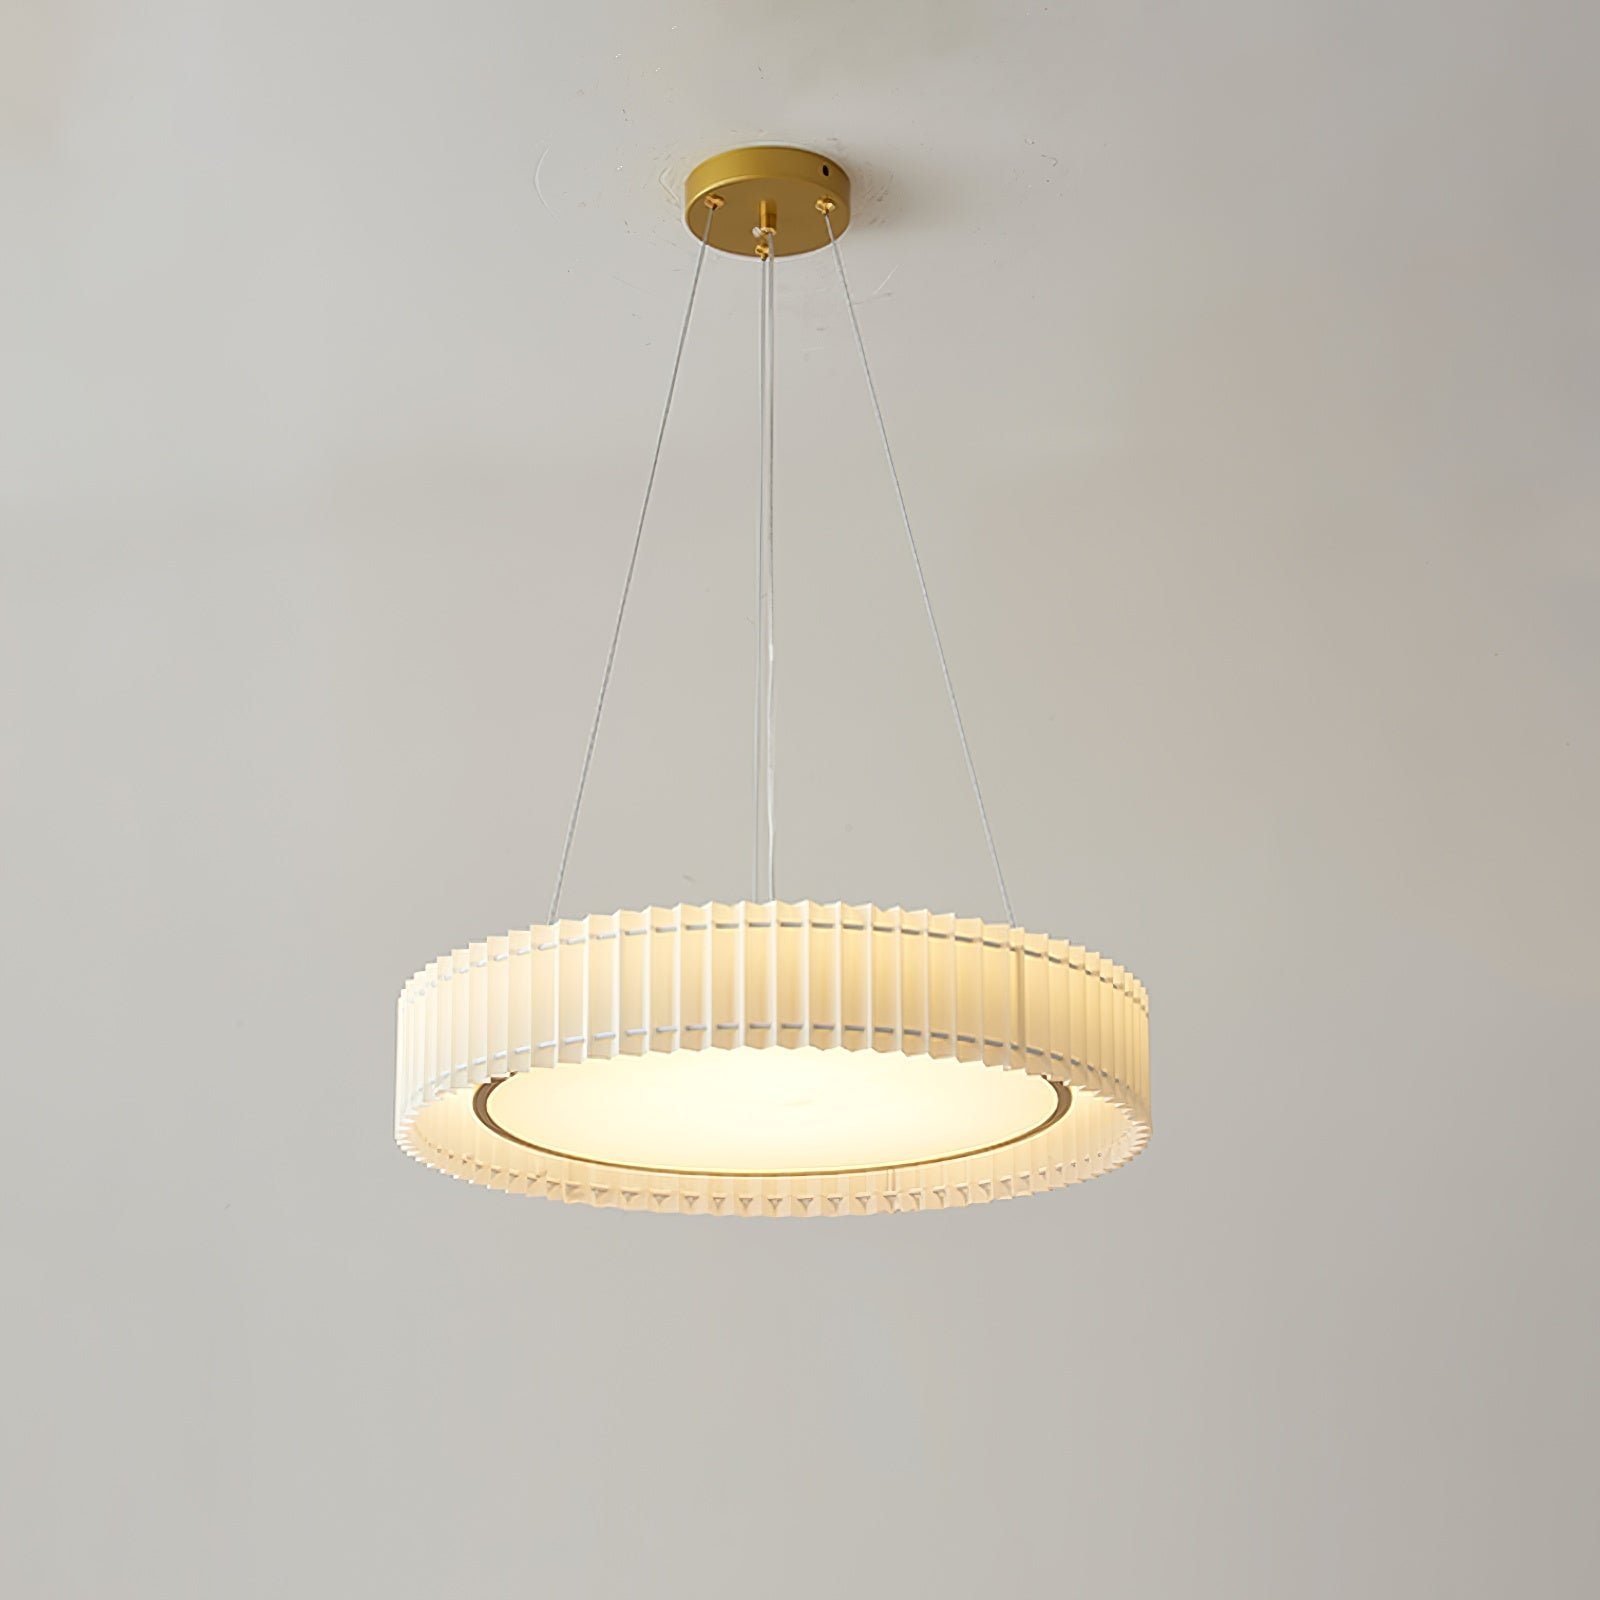 Round Pleated Pendant Lamp in Gold and Beige, Diameter 23.6 inches and Height 7.8 inches (60cm x 20cm), emitting Cool White light.